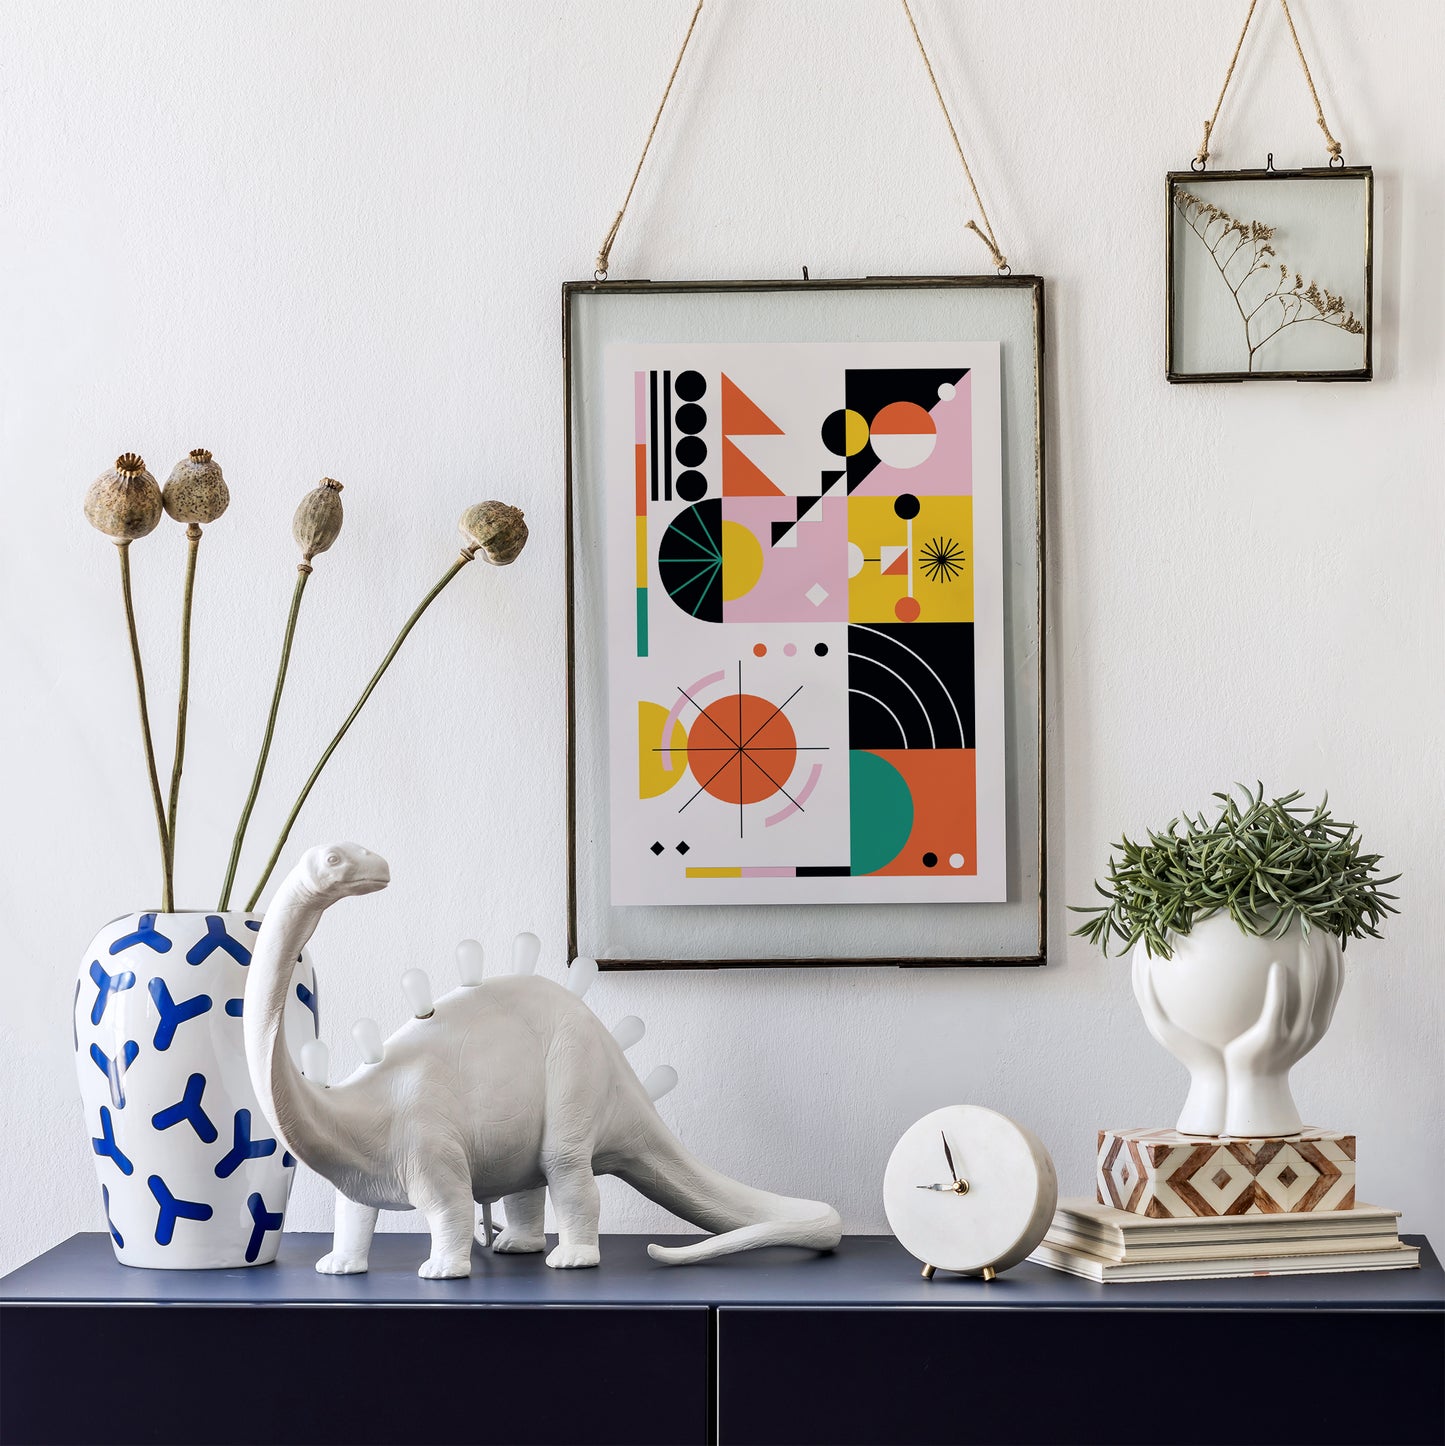 Abstract Geometric Shapes Poster